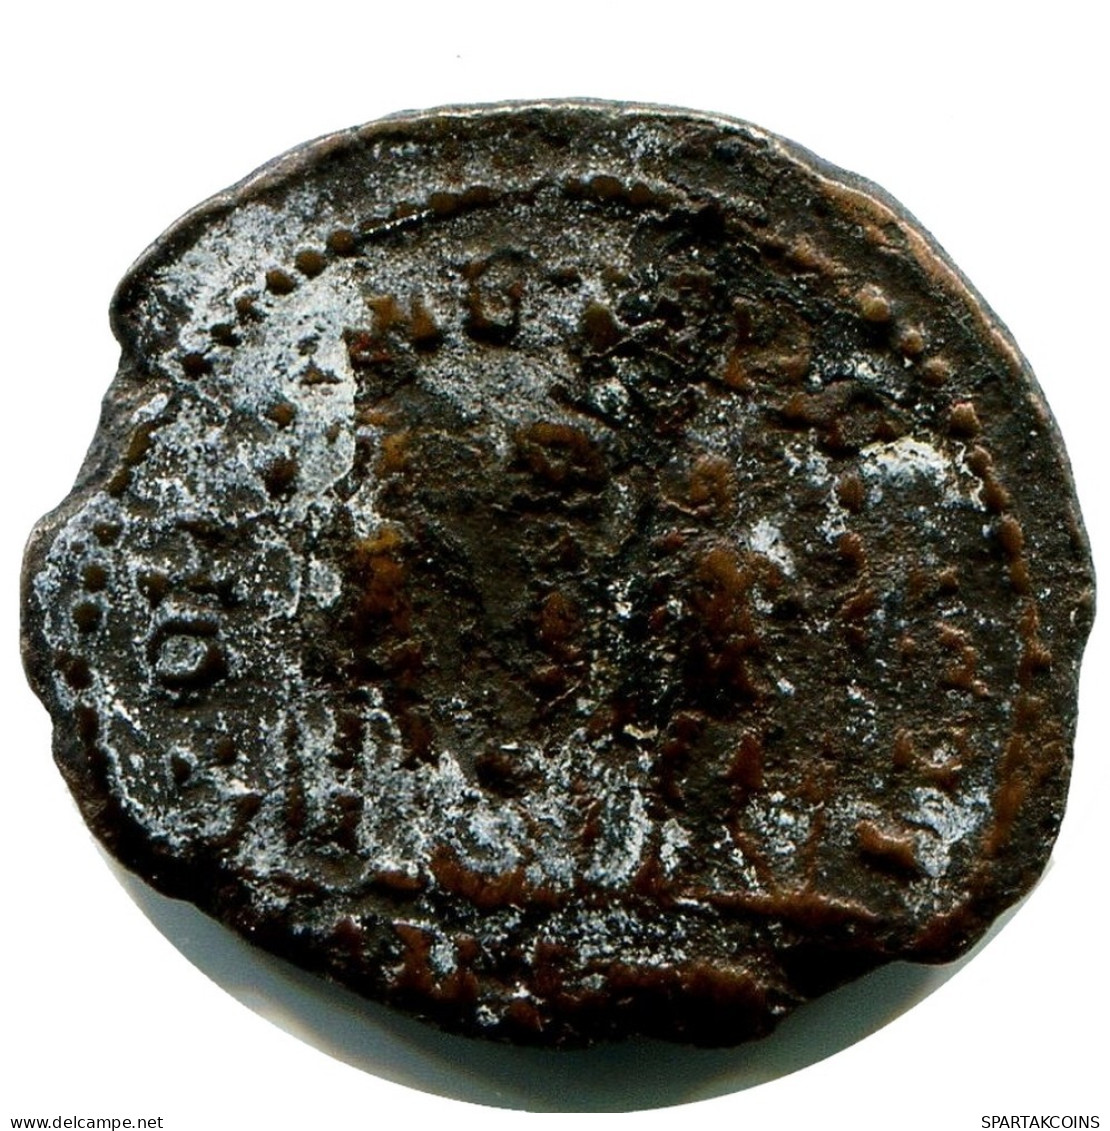 CONSTANS MINTED IN ANTIOCH FOUND IN IHNASYAH HOARD EGYPT #ANC11862.14.F.A - El Impero Christiano (307 / 363)